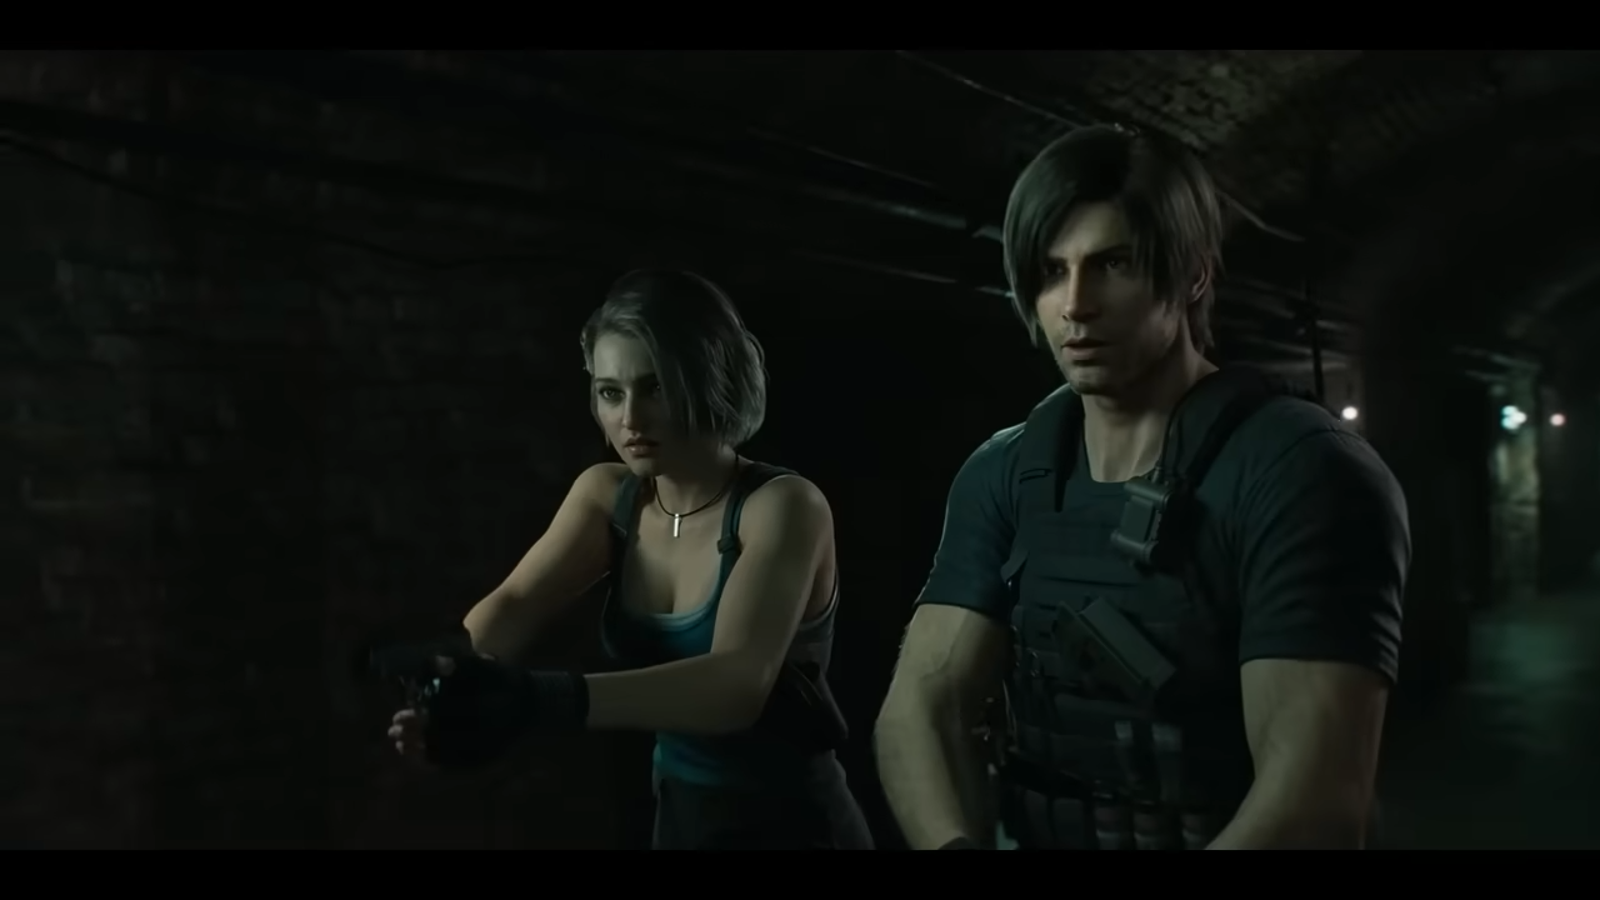 Resident Evil 2 Remake First Screenshots of Claire Redfield